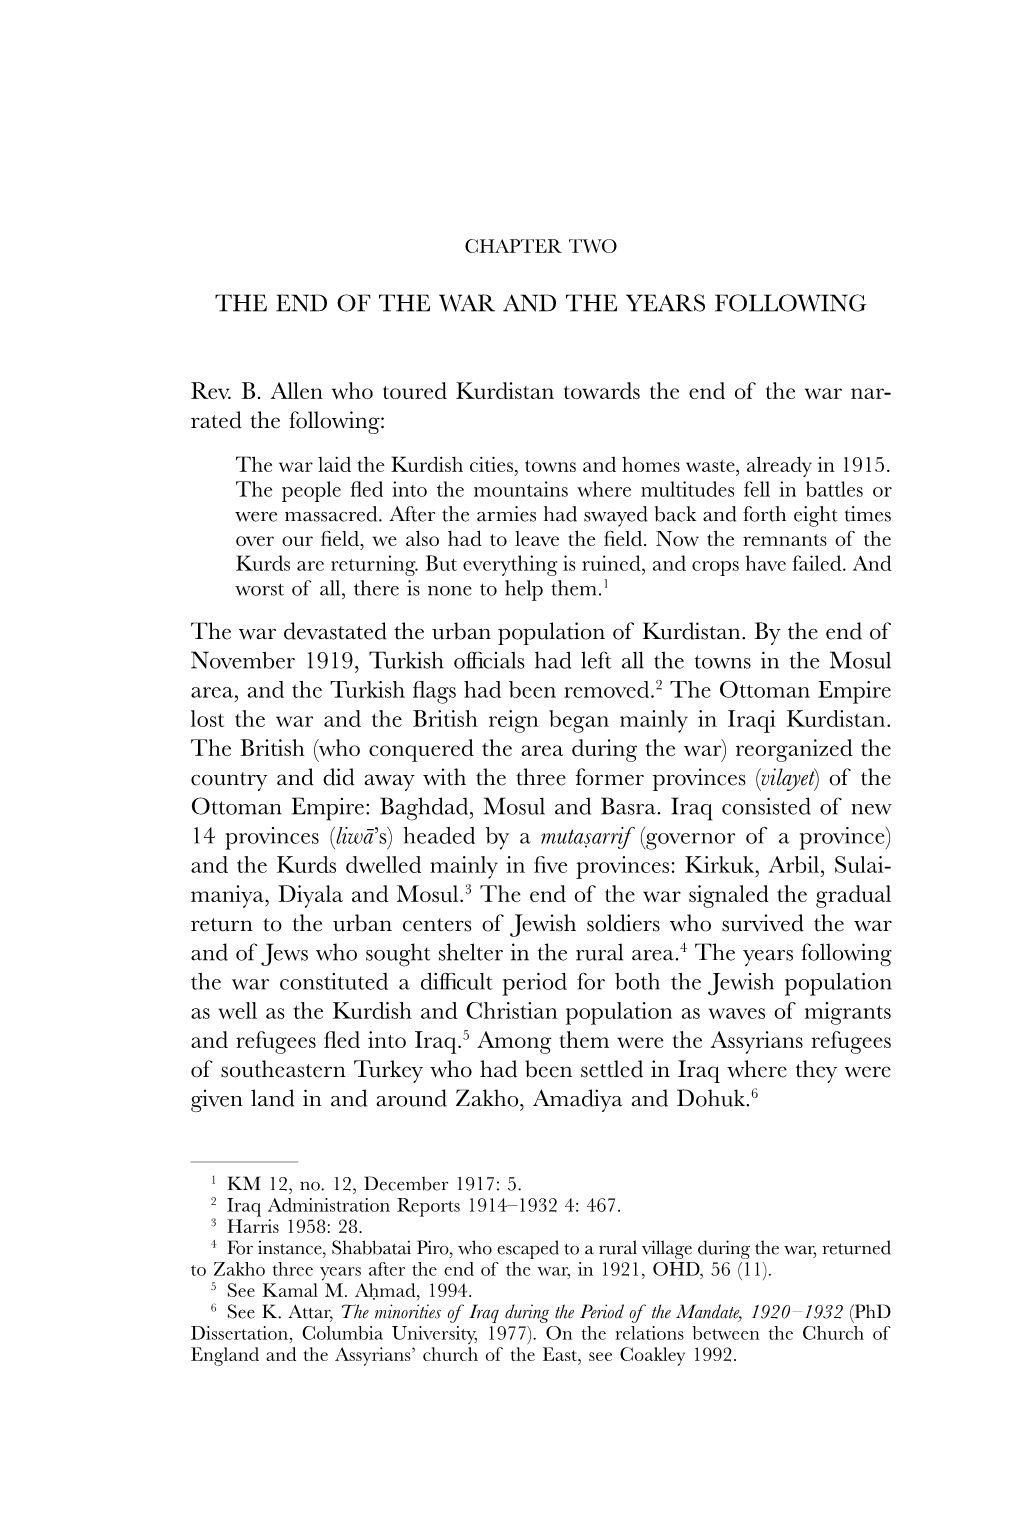 THE END of the WAR and the YEARS FOLLOWING Rev. B. Allen Who Toured Kurdistan Towards the End of the War